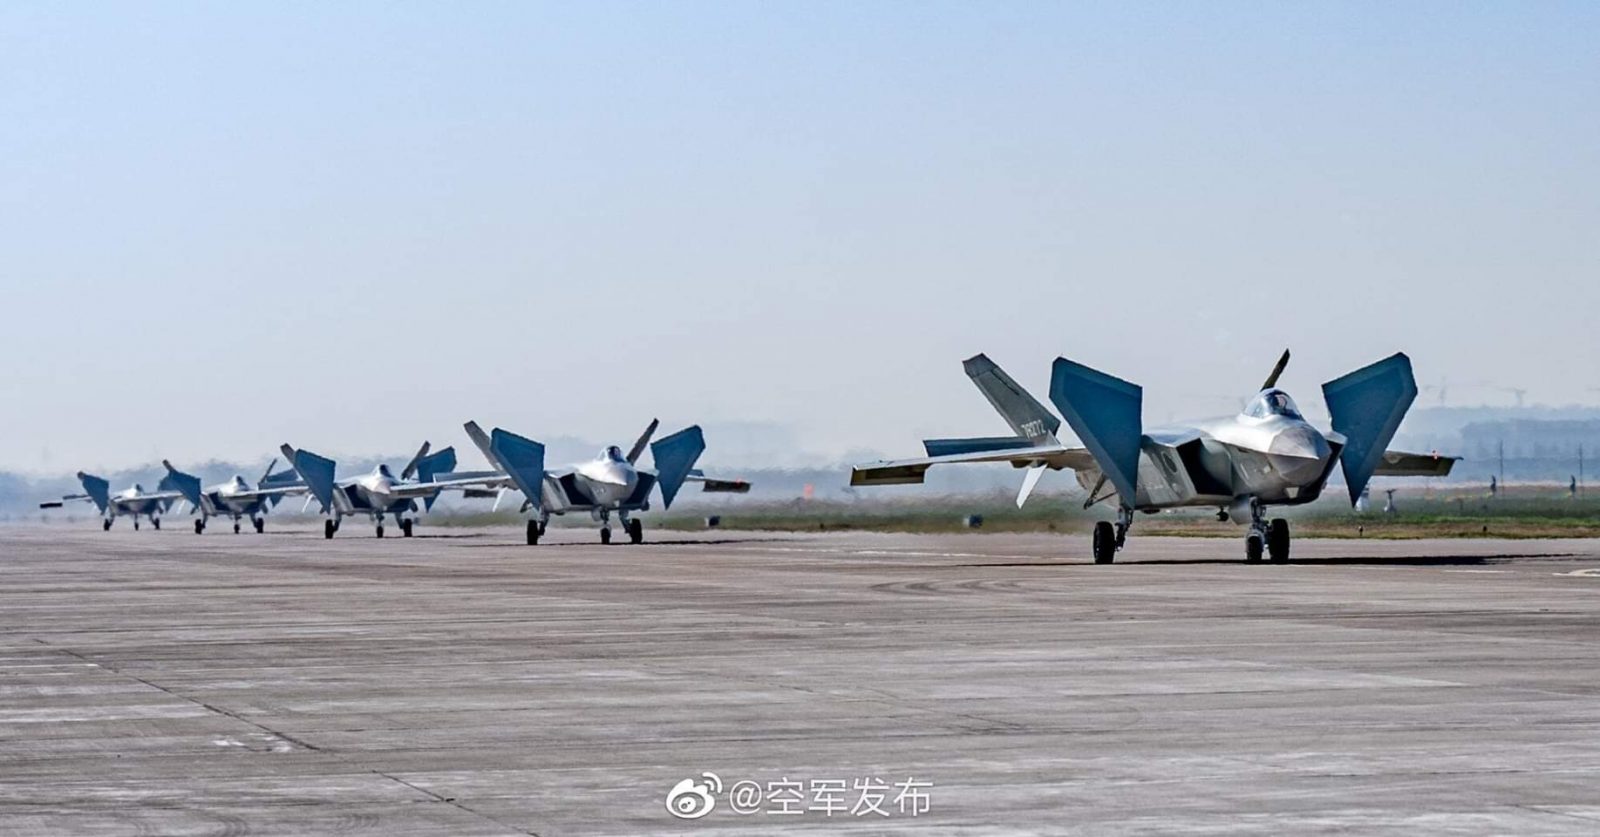 China’s J-20 Stealth Fighter Jet Entered Mass Production?